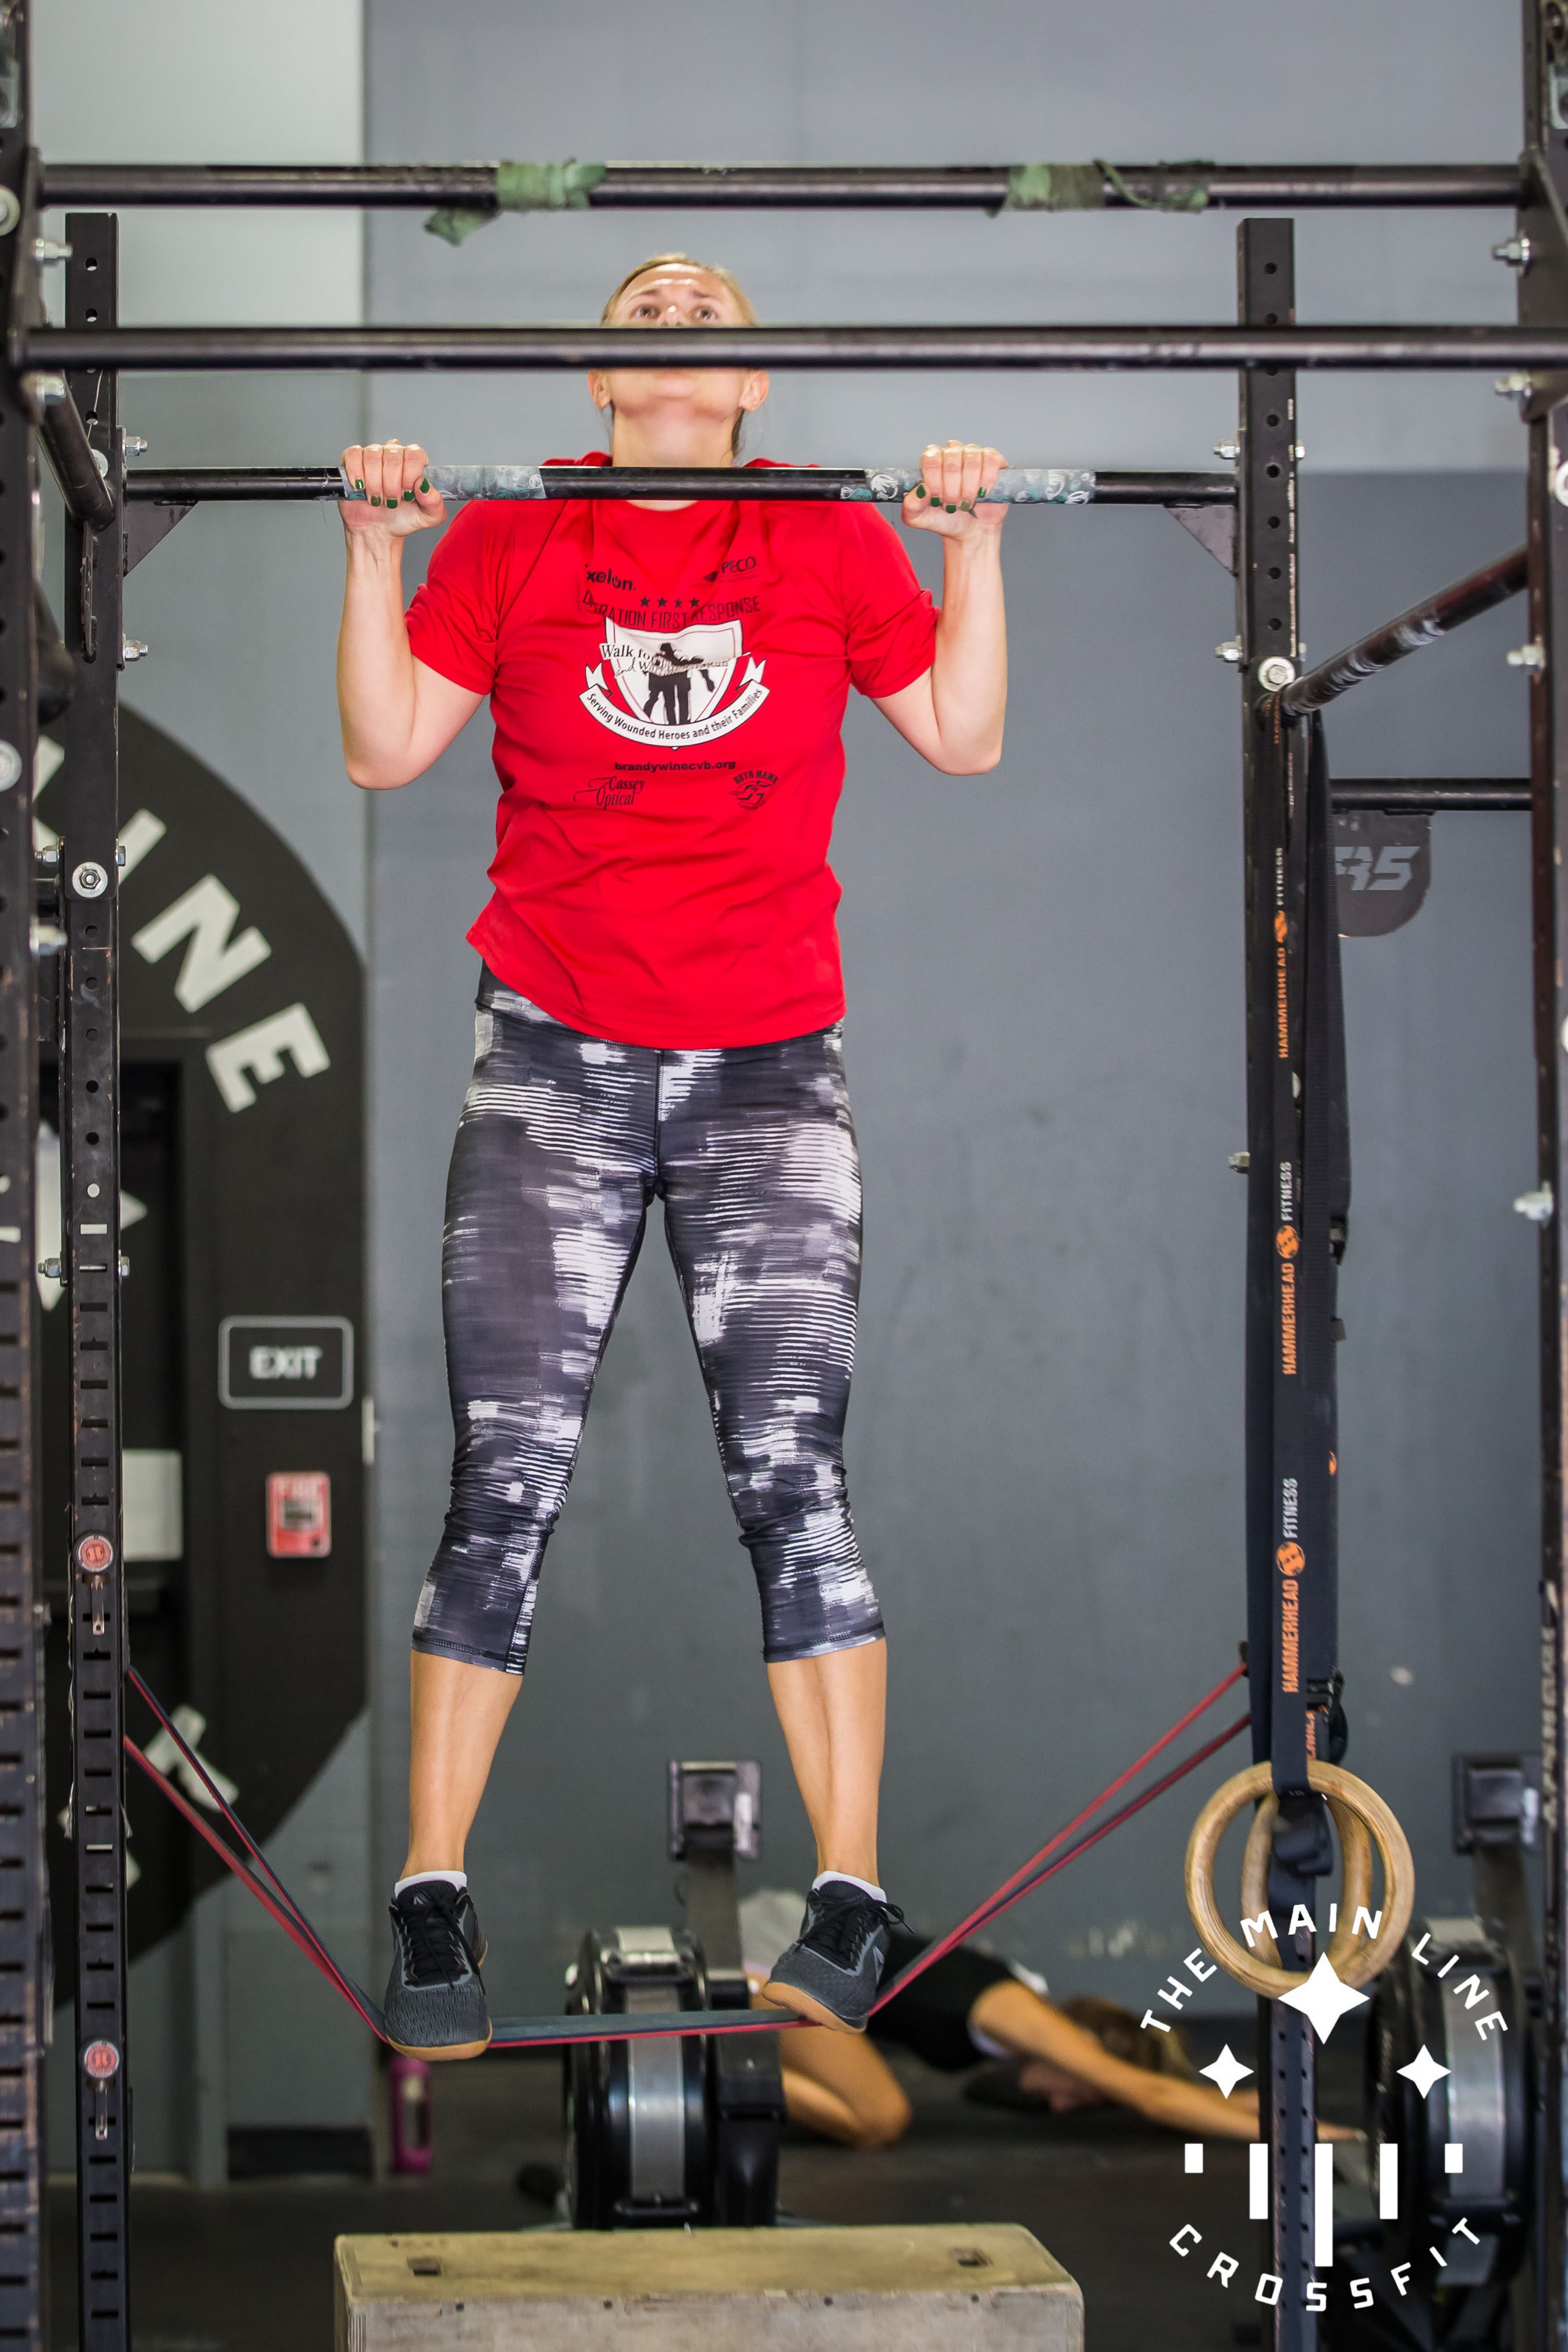 Tuesday 12.11.18 CrossFit